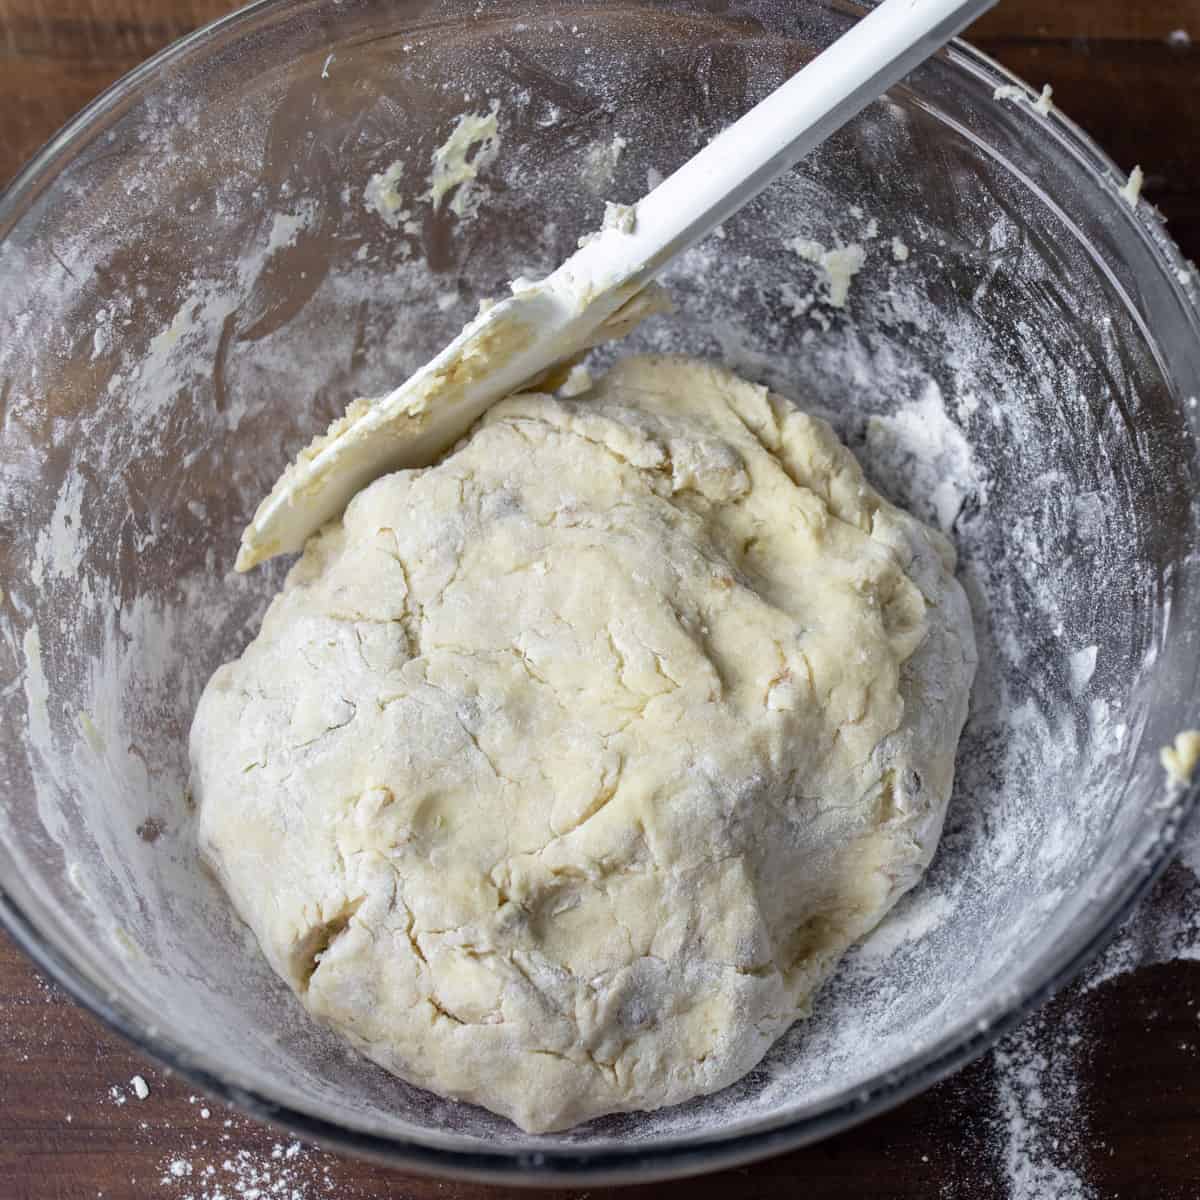 Scone dough mixed in a glass bowl.